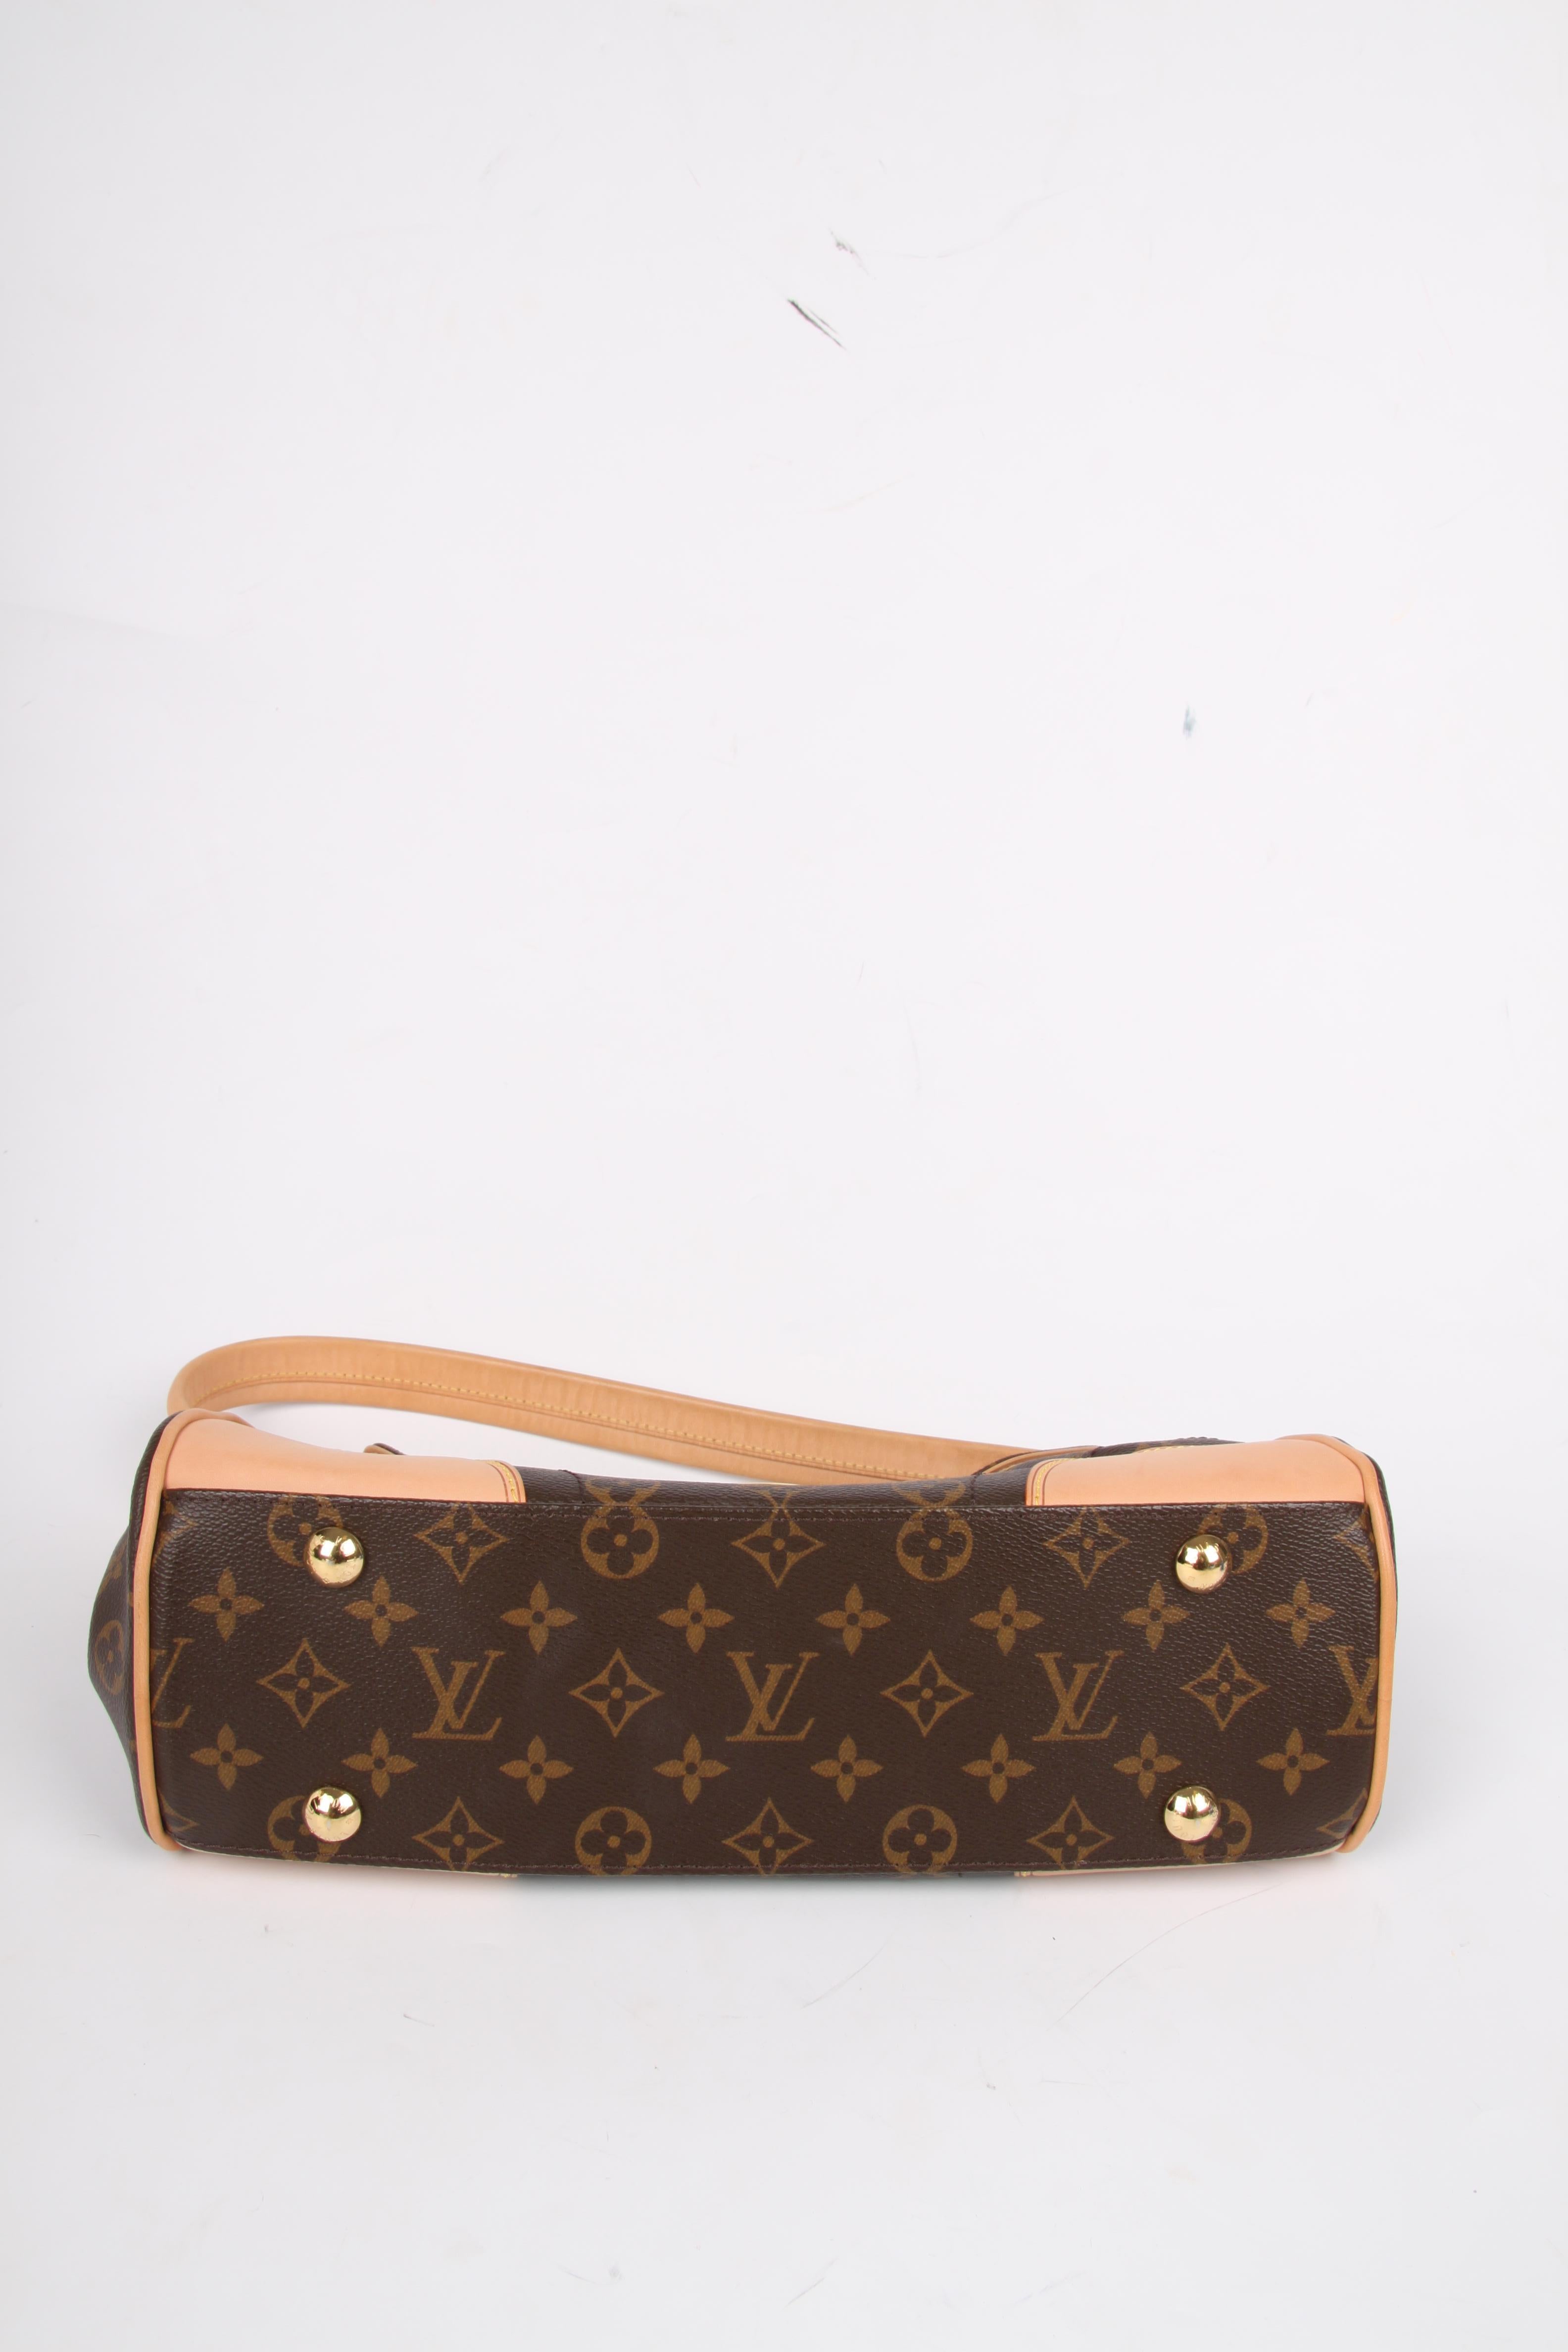 This wonderful bag is named after the posh area of Los Angeles; it is the Louis Vuitton Beverly MM Monogram Bag.

Of course crafted from the welknown dark brown canvas is covered with LV monograms. Garnished with natural-tone leather and gold-tone